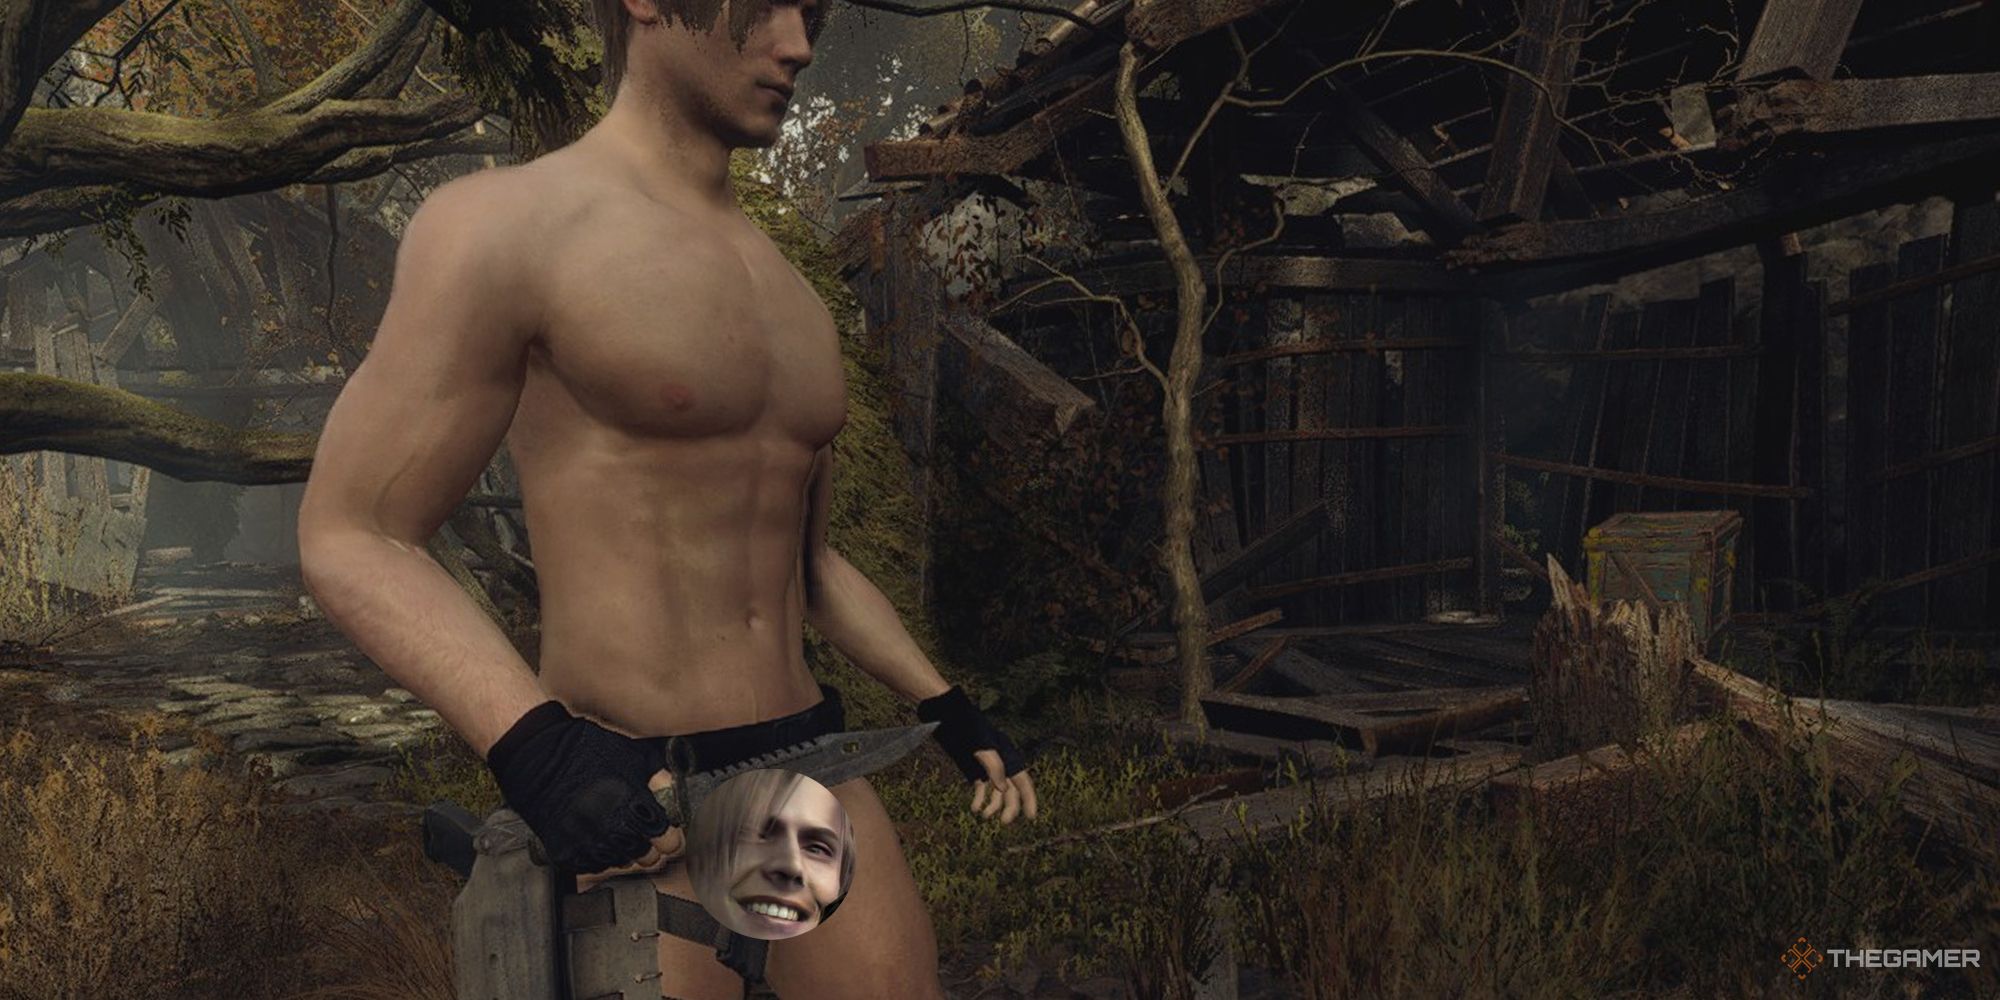 Resident Evil 4 remake cursed nude mods have already landed